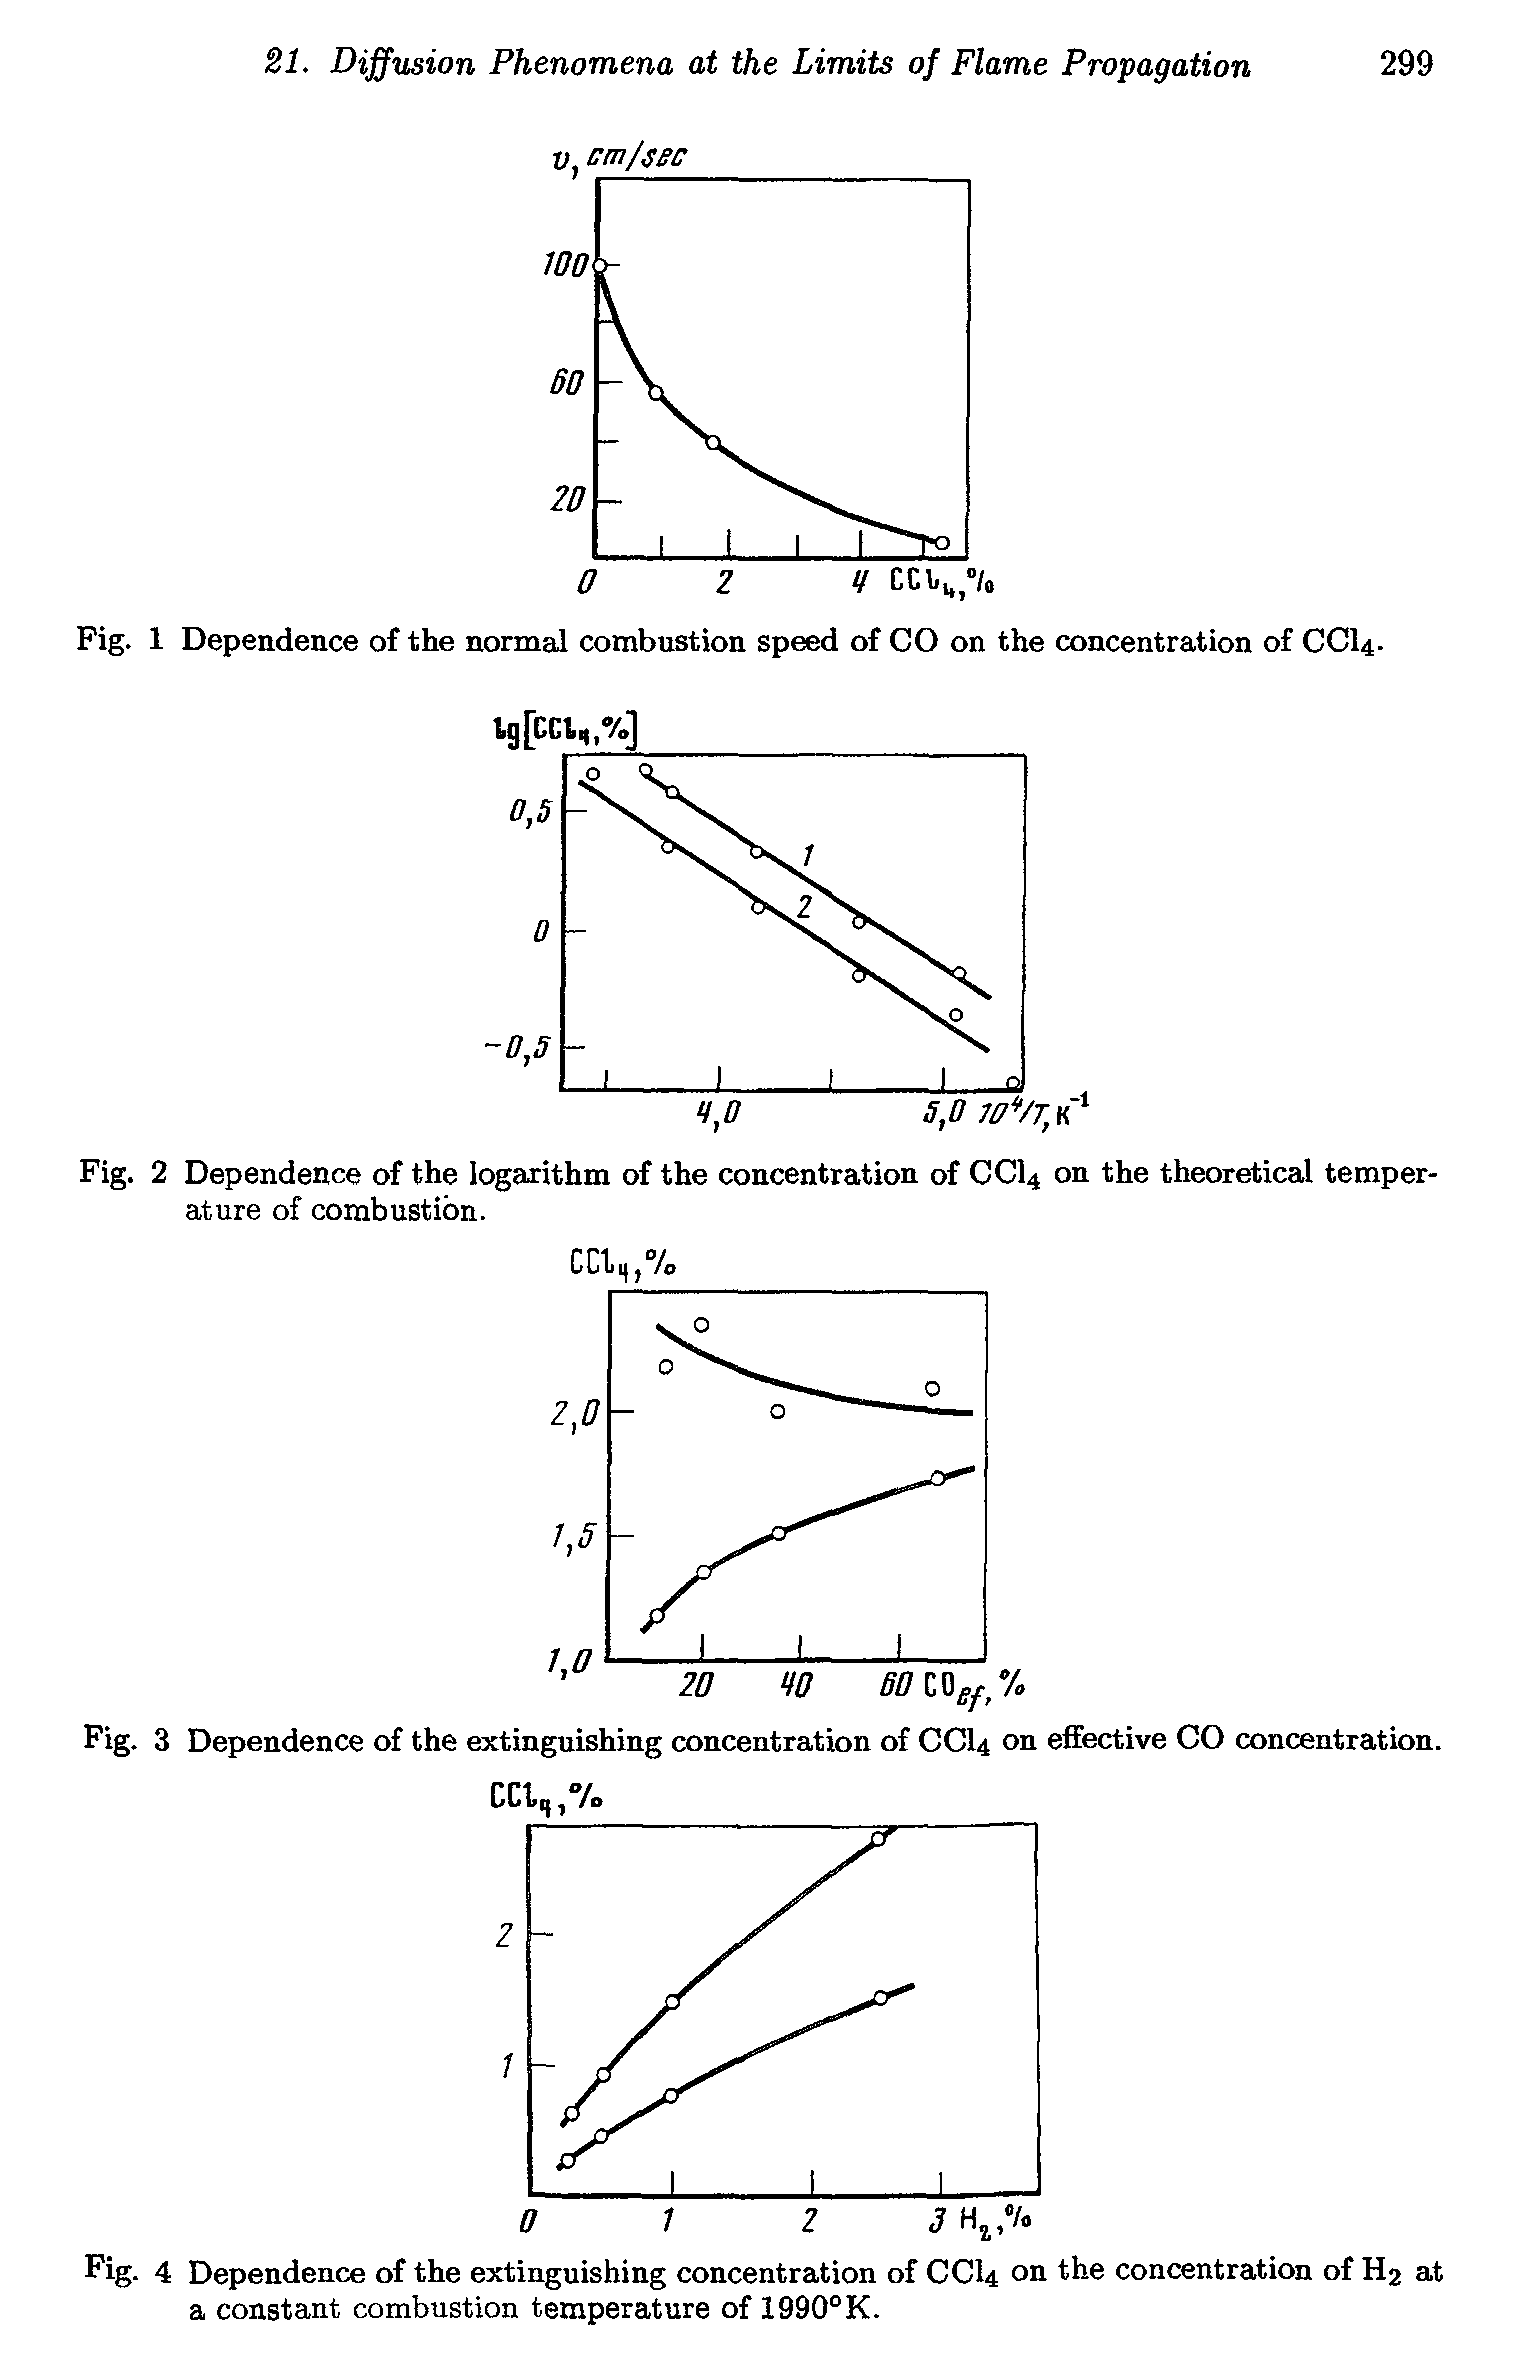 Fig. 1 Dependence of the normal combustion speed of CO on the concentration of CCI4.